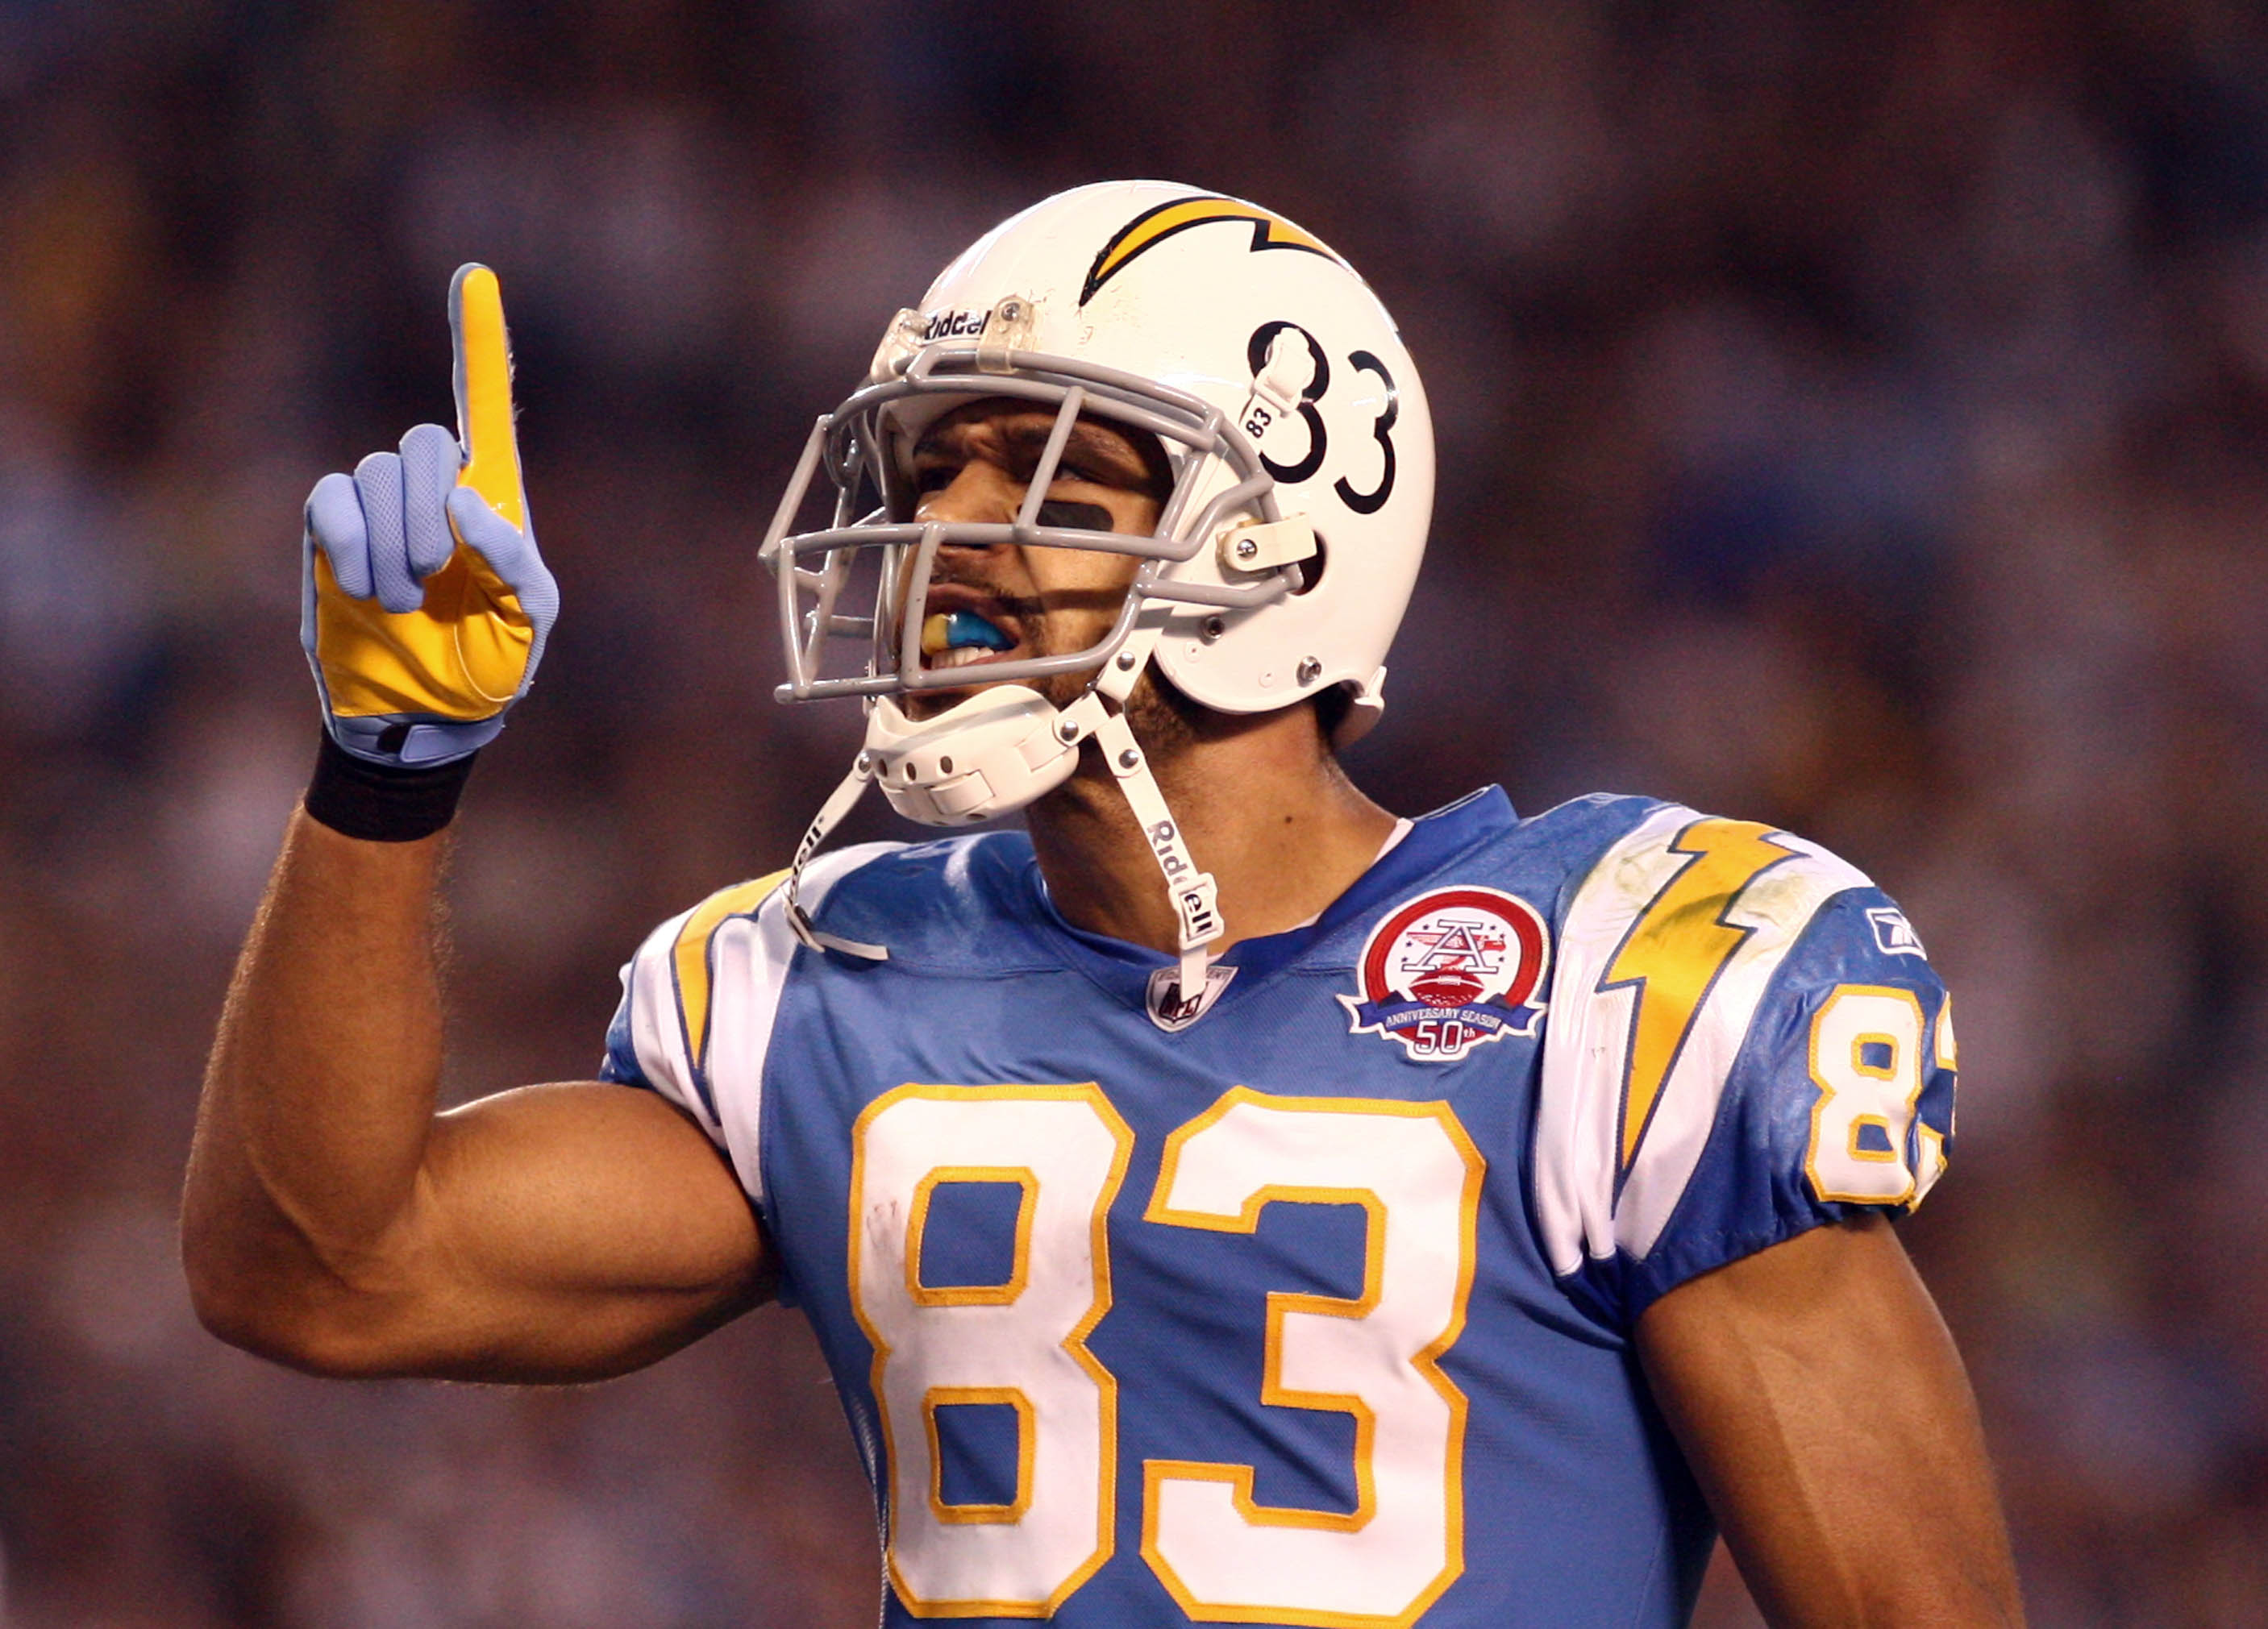 SAN DIEGO, CA - OCTOBER 19:  Vincent Jackson #83 of the San Diego Chargers celebrates his touchdown against the Denver Broncos in the first half during Monday Night Football on October 19, 2009 at Qualcomm Stadium in San Diego, California. (Photo by Donal